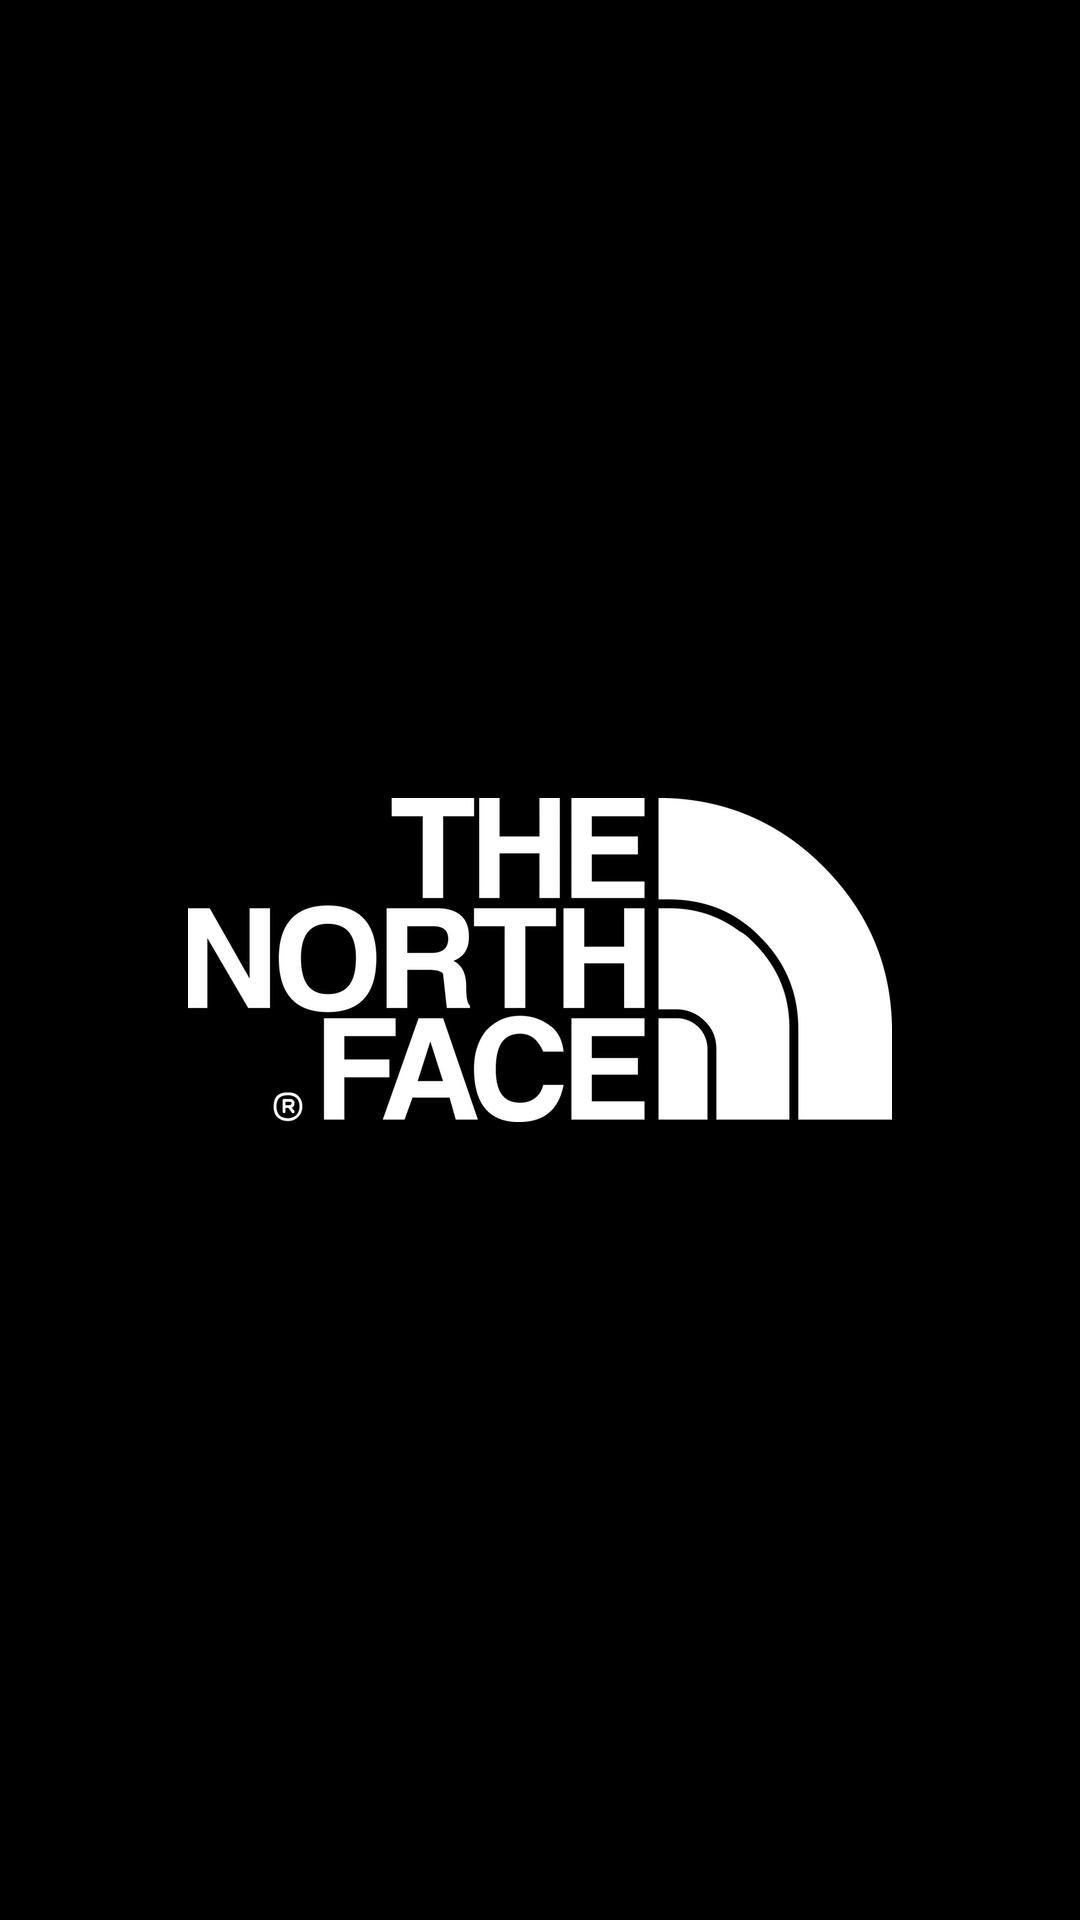 North Face Logo Png Images PNGWing | vlr.eng.br